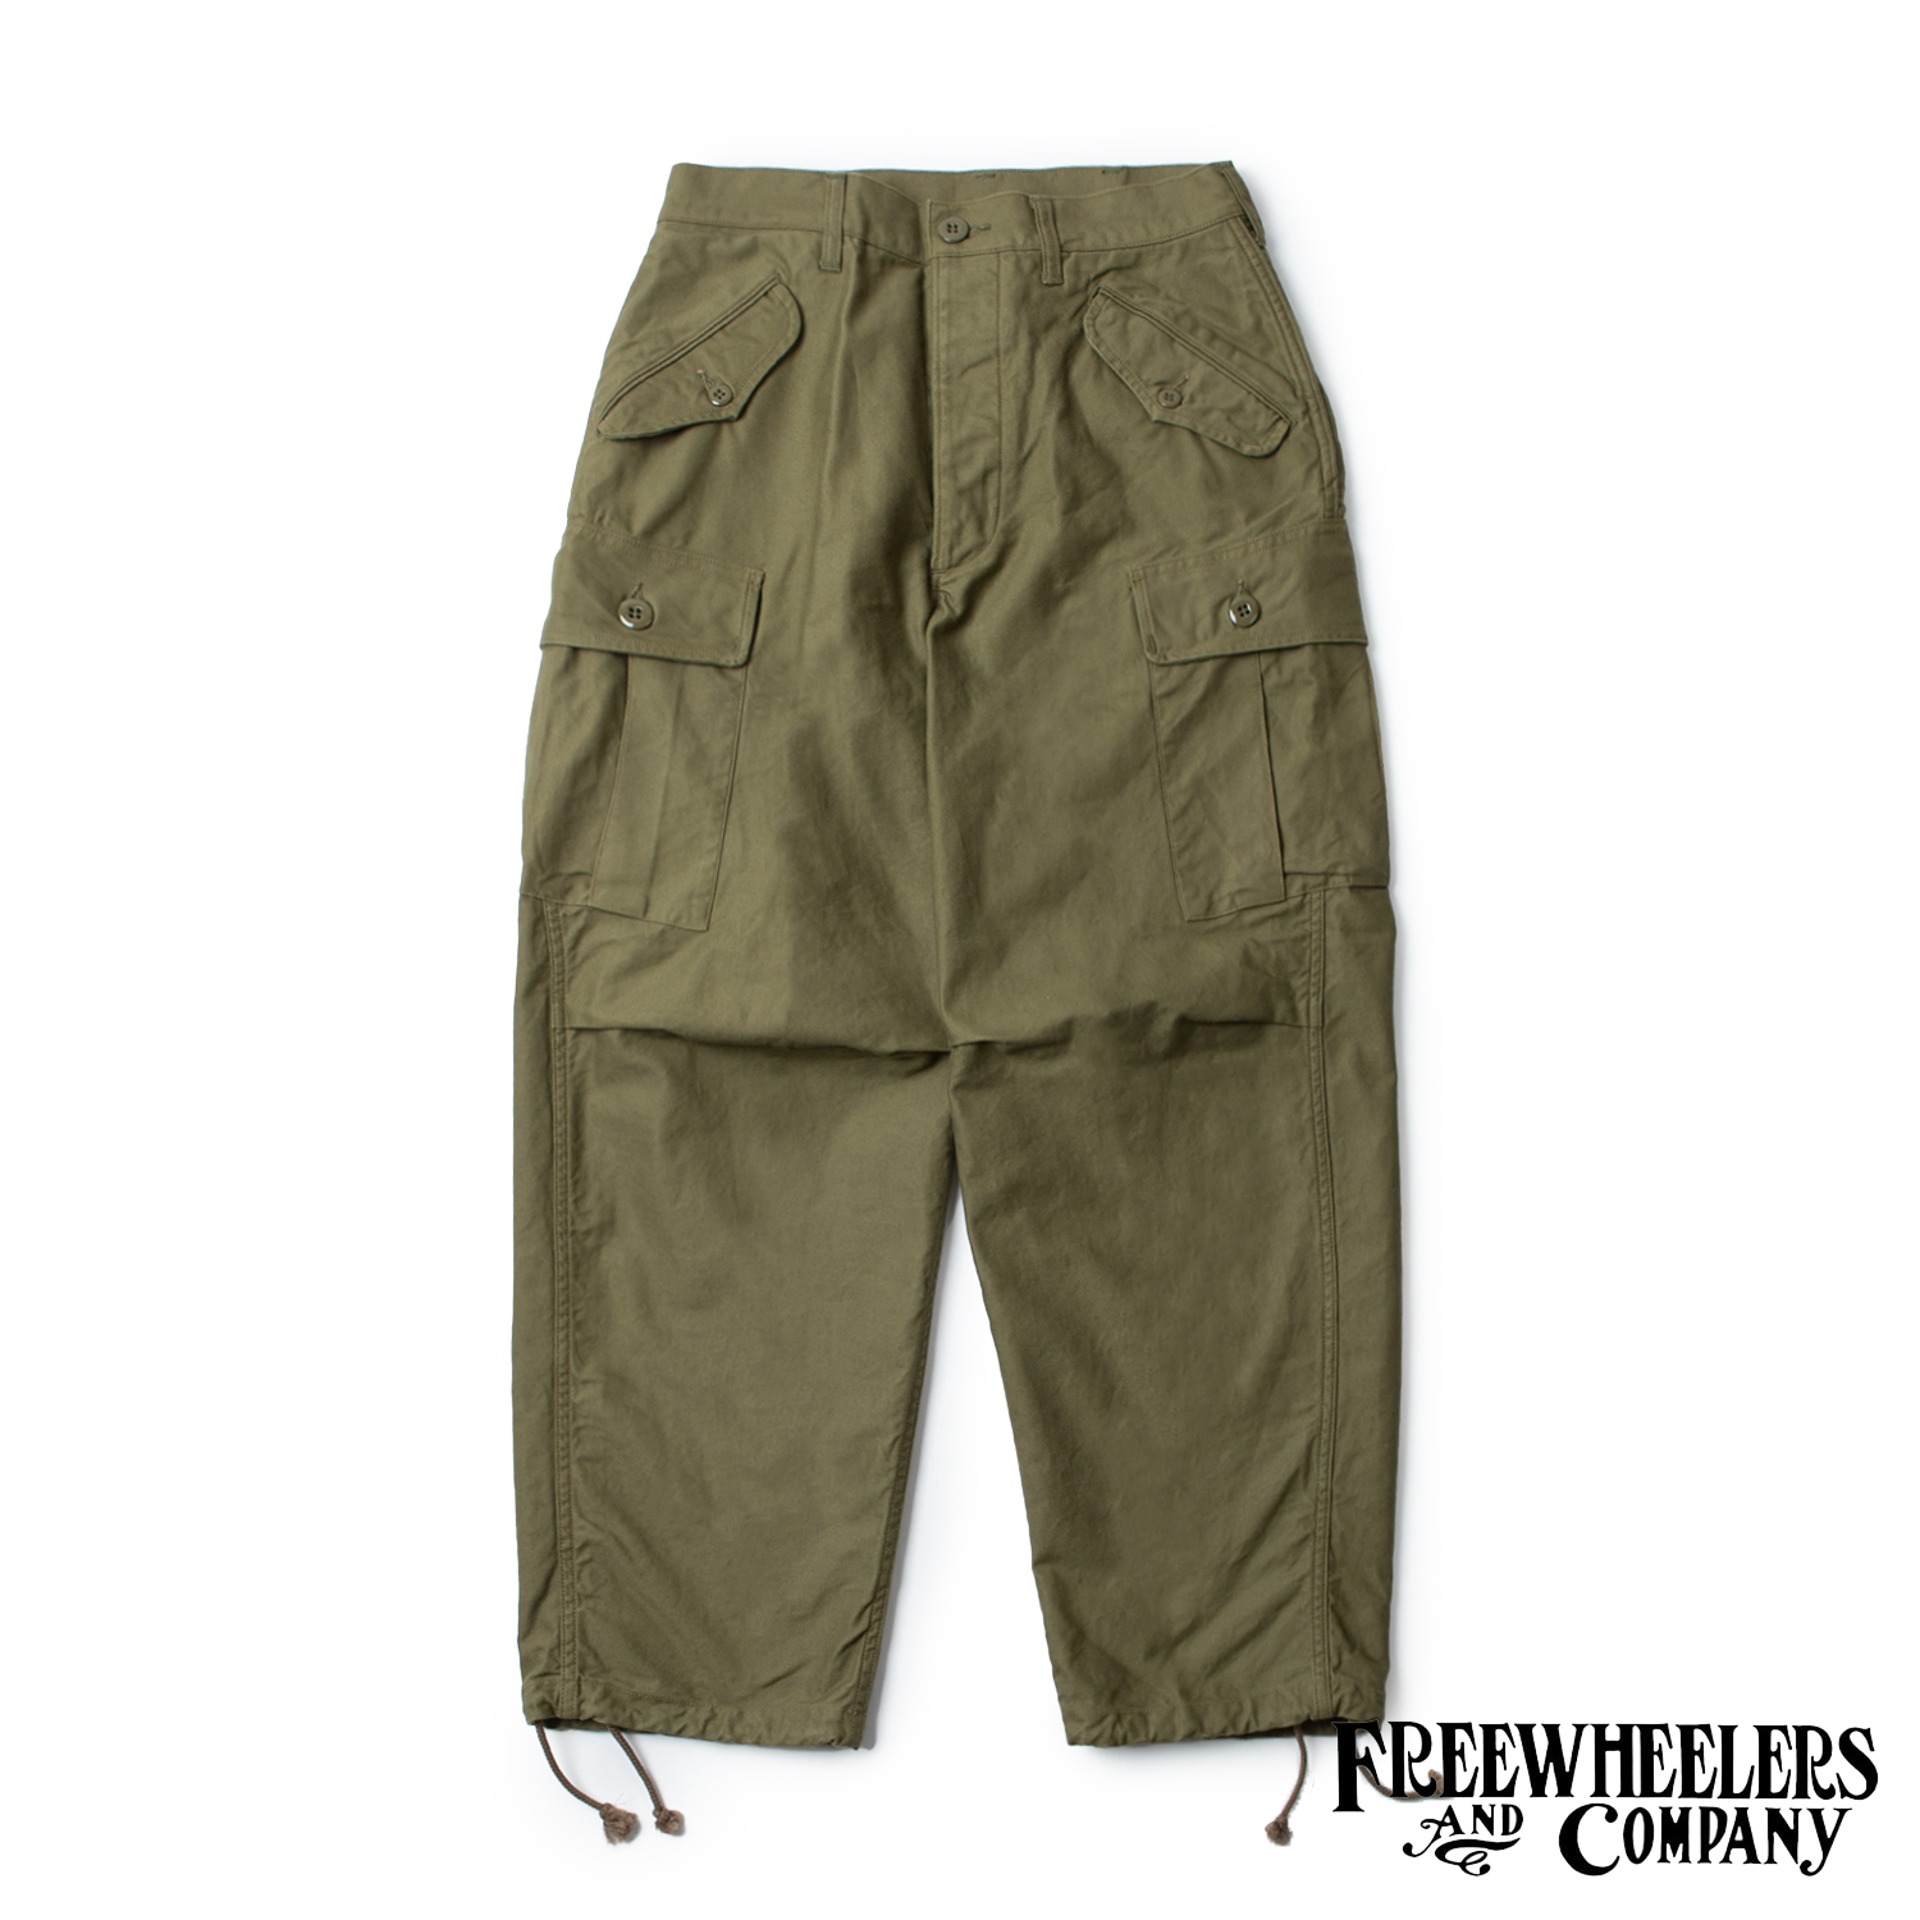  [UNION SPECIAL OVERALLS]   Military Tropical Trousers  “JUNGLE FATIGUES”  (Olive)  (5/3 Open)